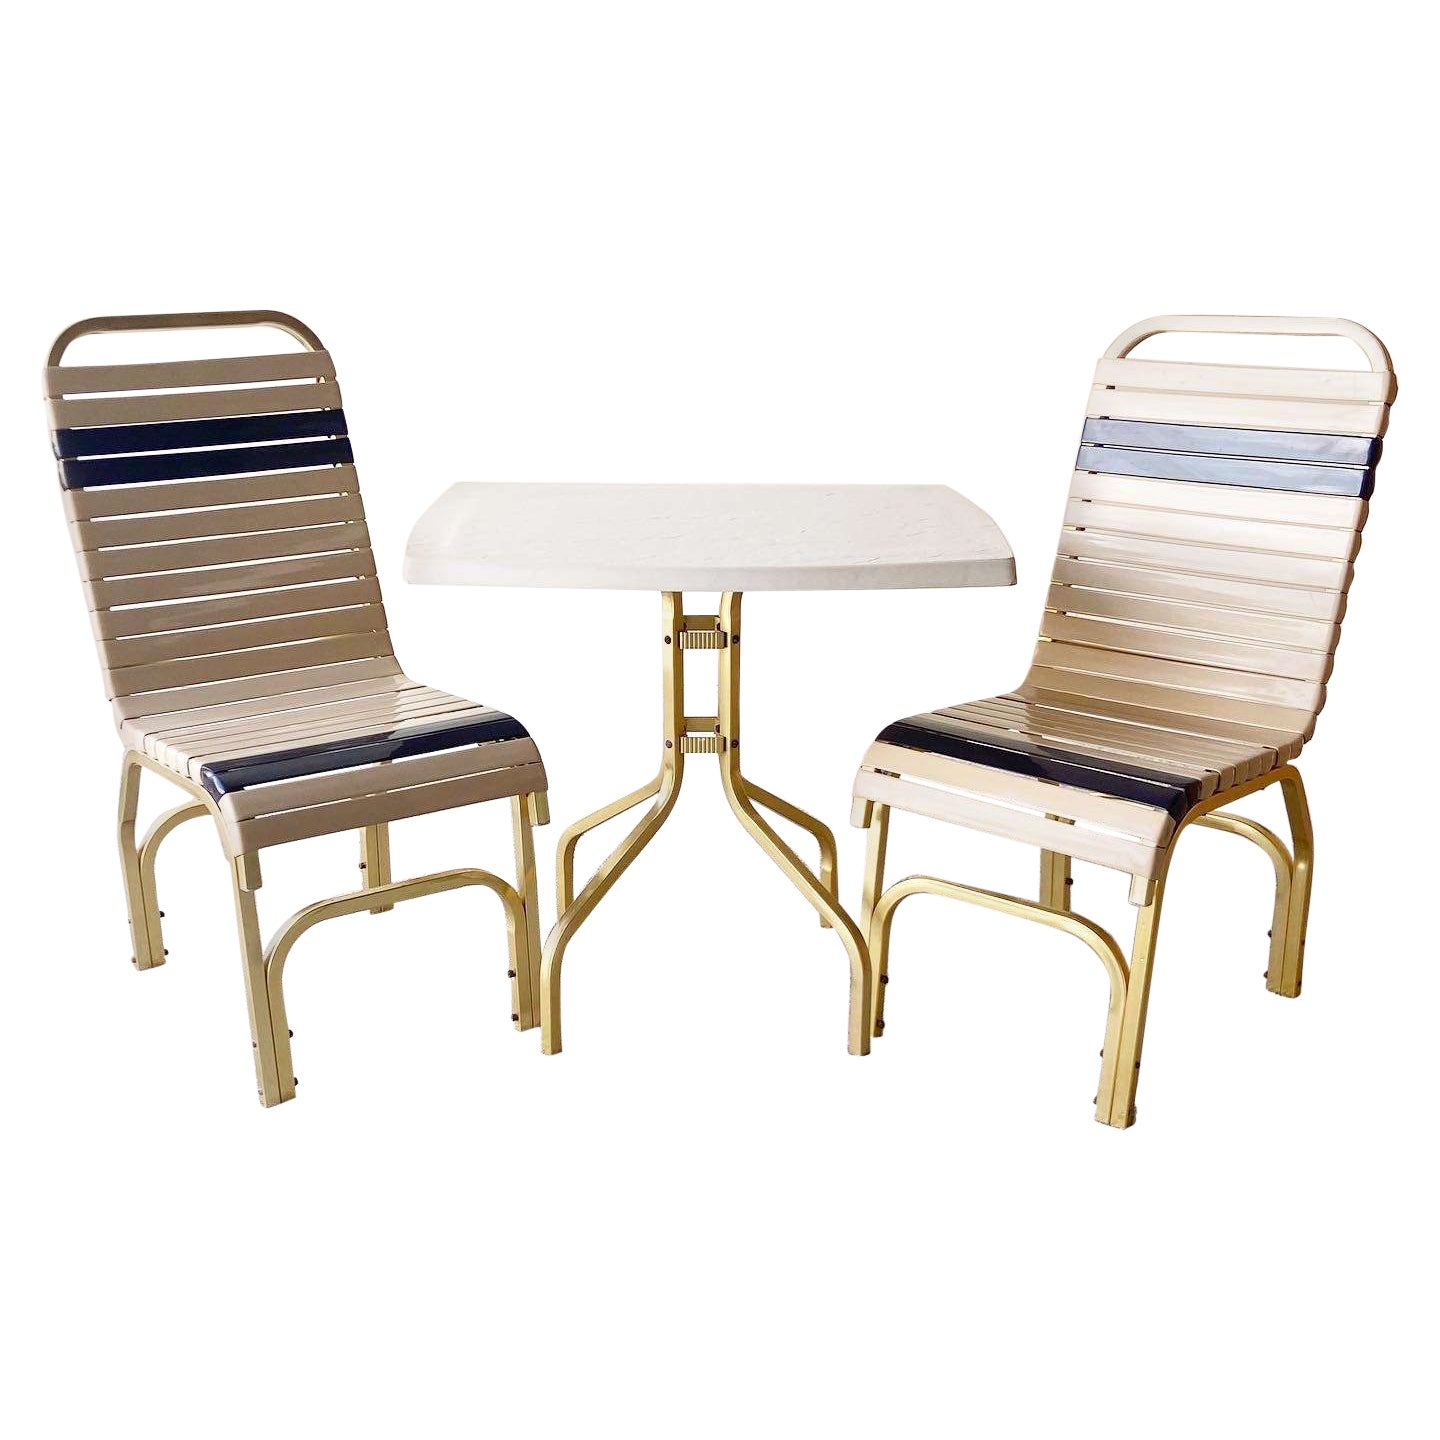 Miami Gold Beige & Blue Metal Poolside Chairs and Table - 3 Pieces For Sale